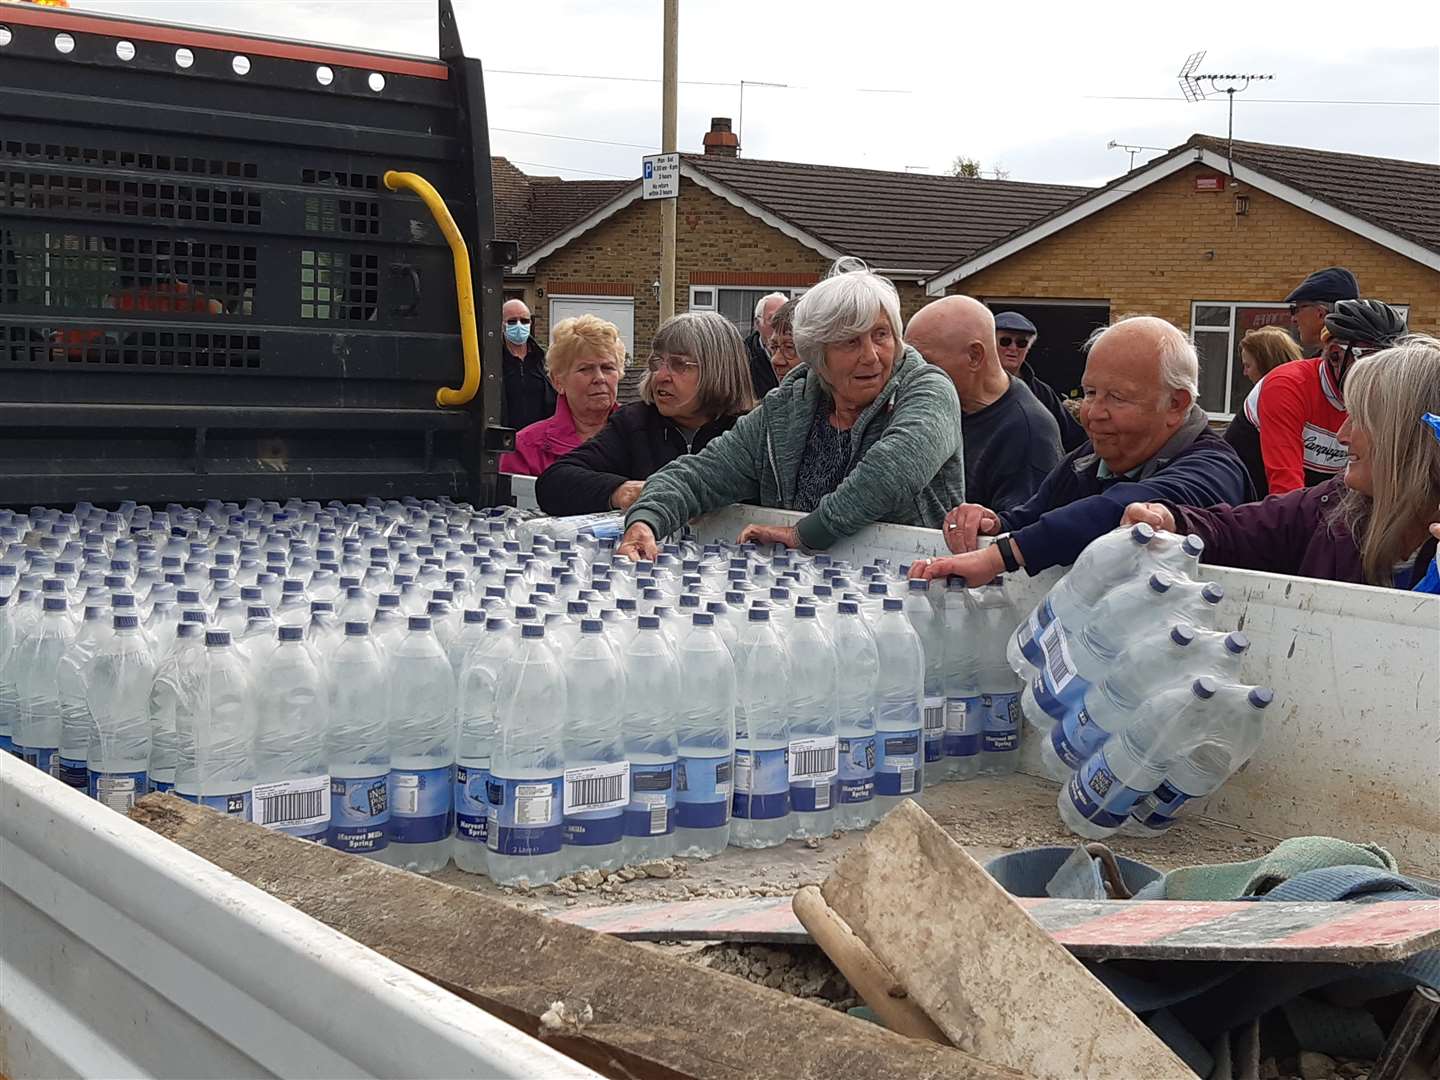 Photographs of people collecting an emergency water delivery in Herne Bay prompted concerns over a lack of social distancing